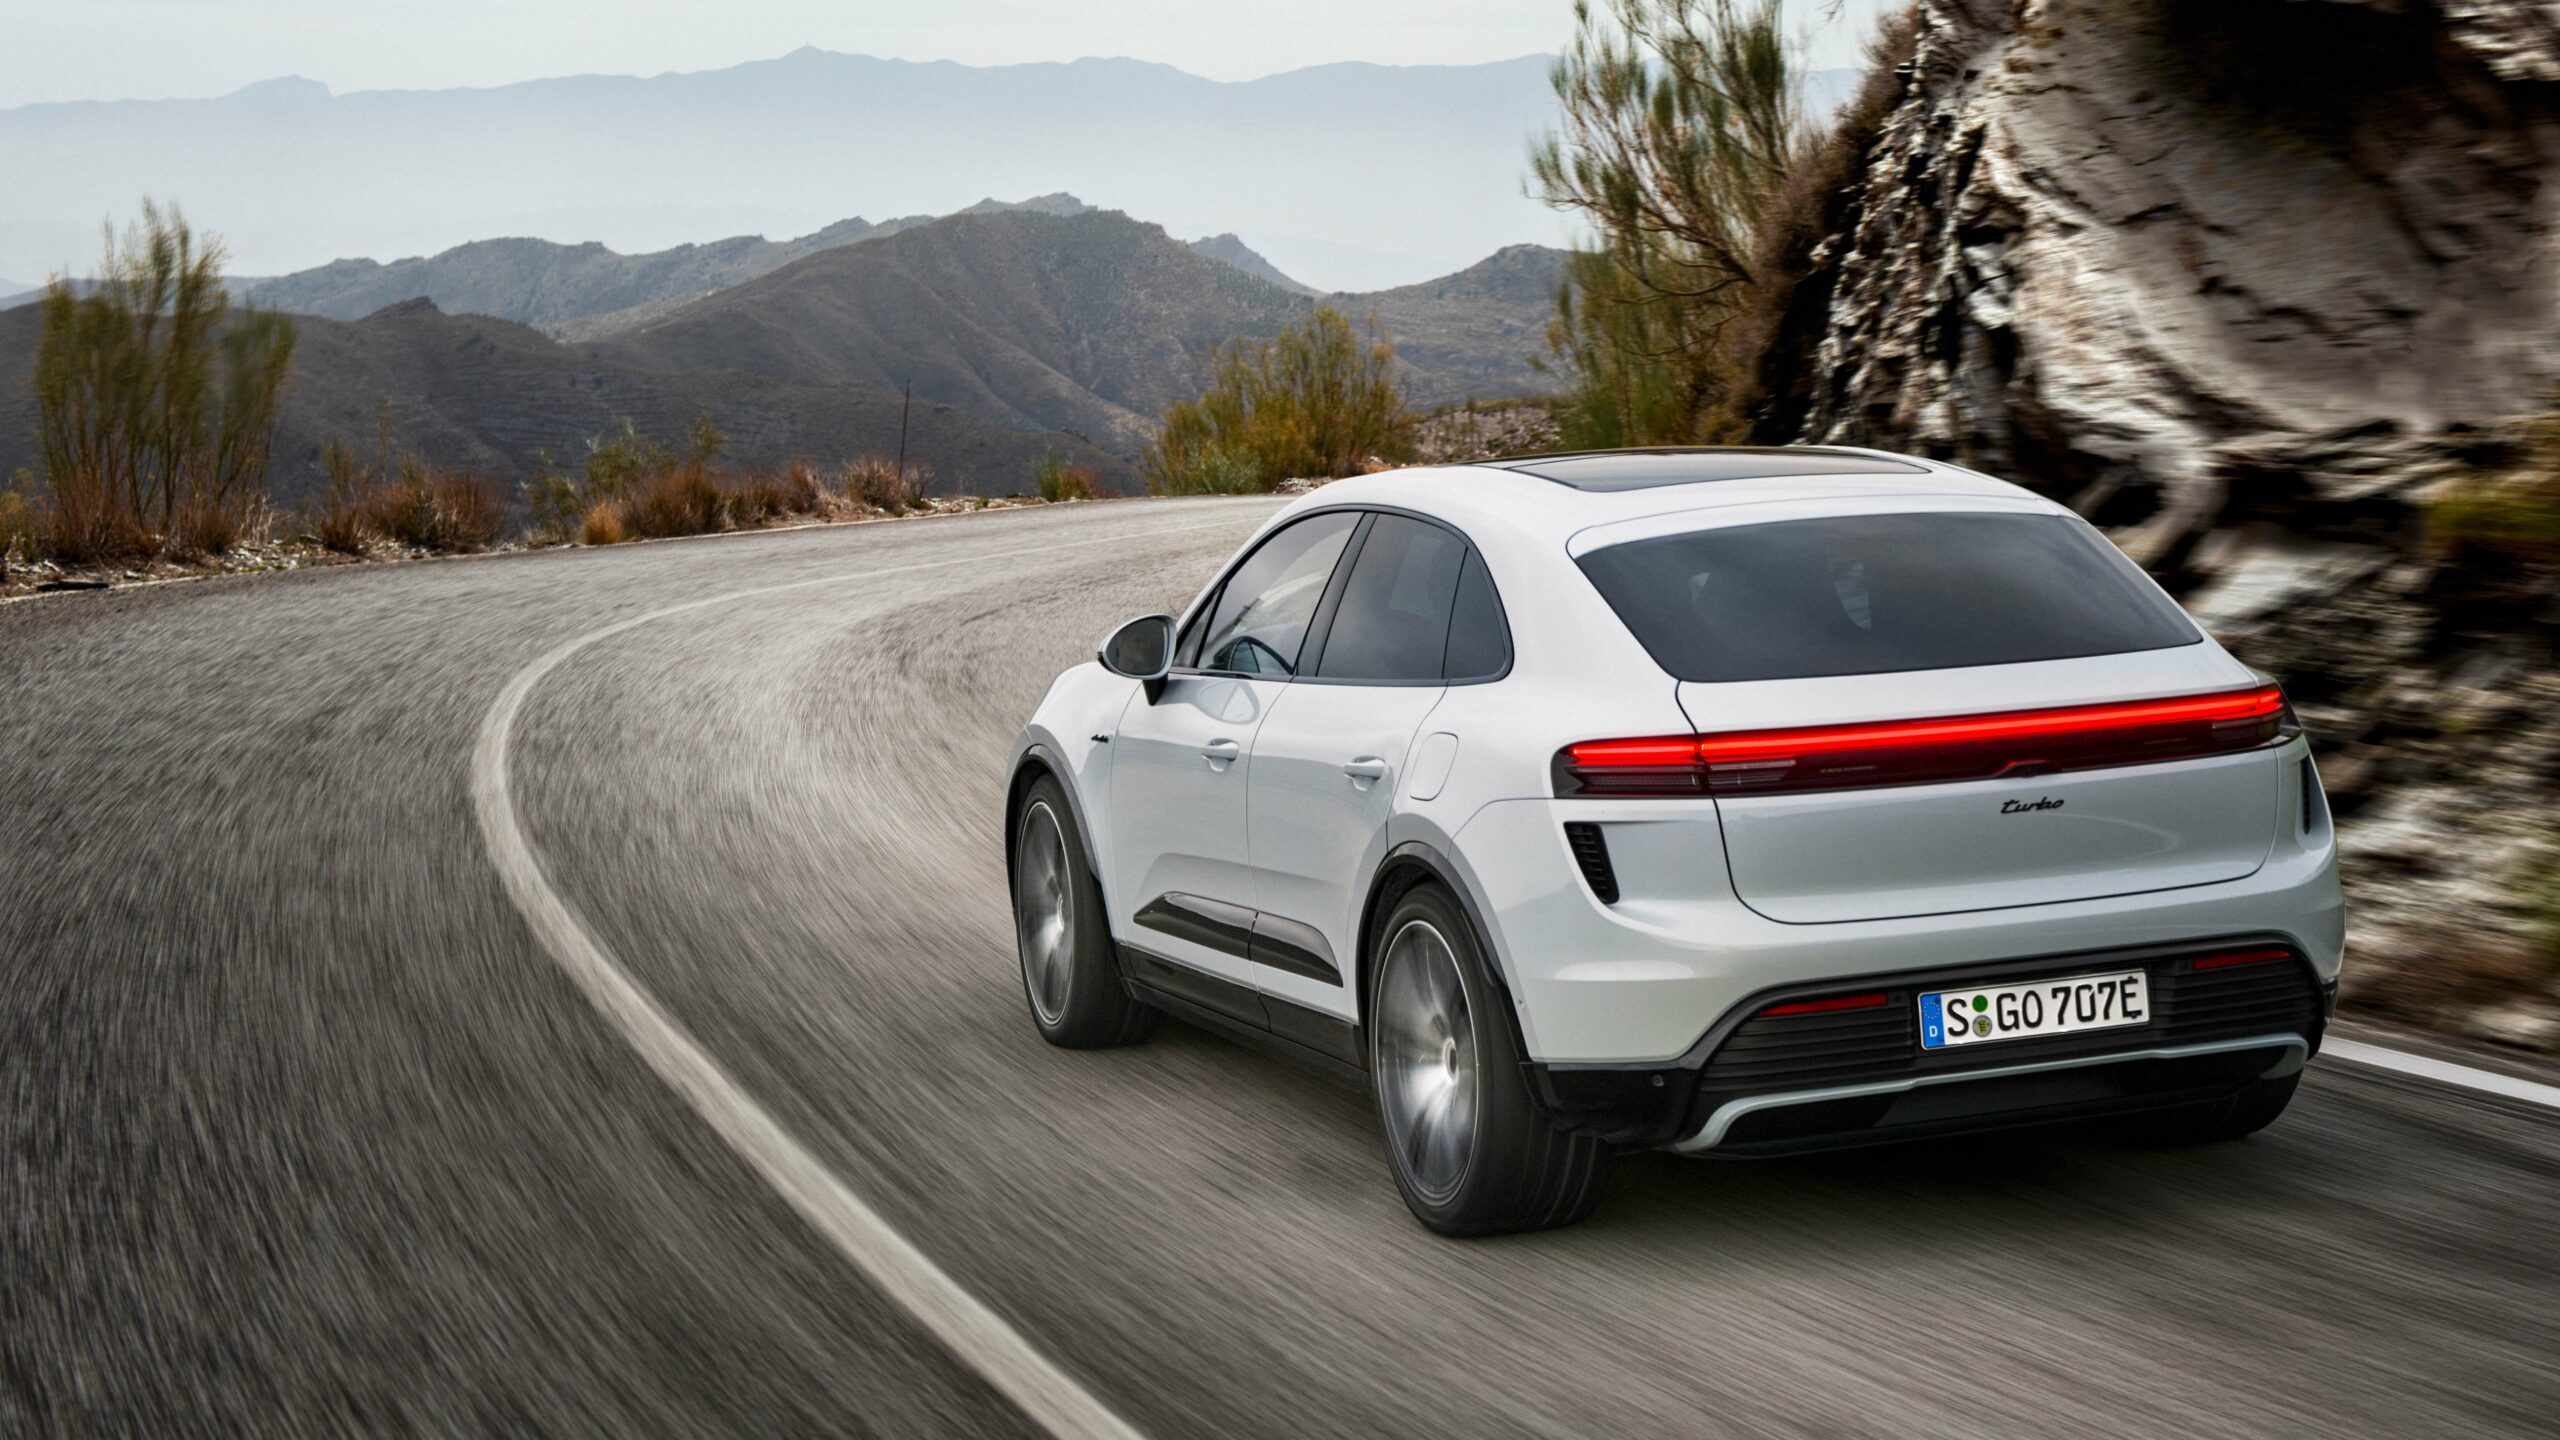 Packed with features, the new Porsche Macan delivers day-to-day usability and e-performance on any terrain.